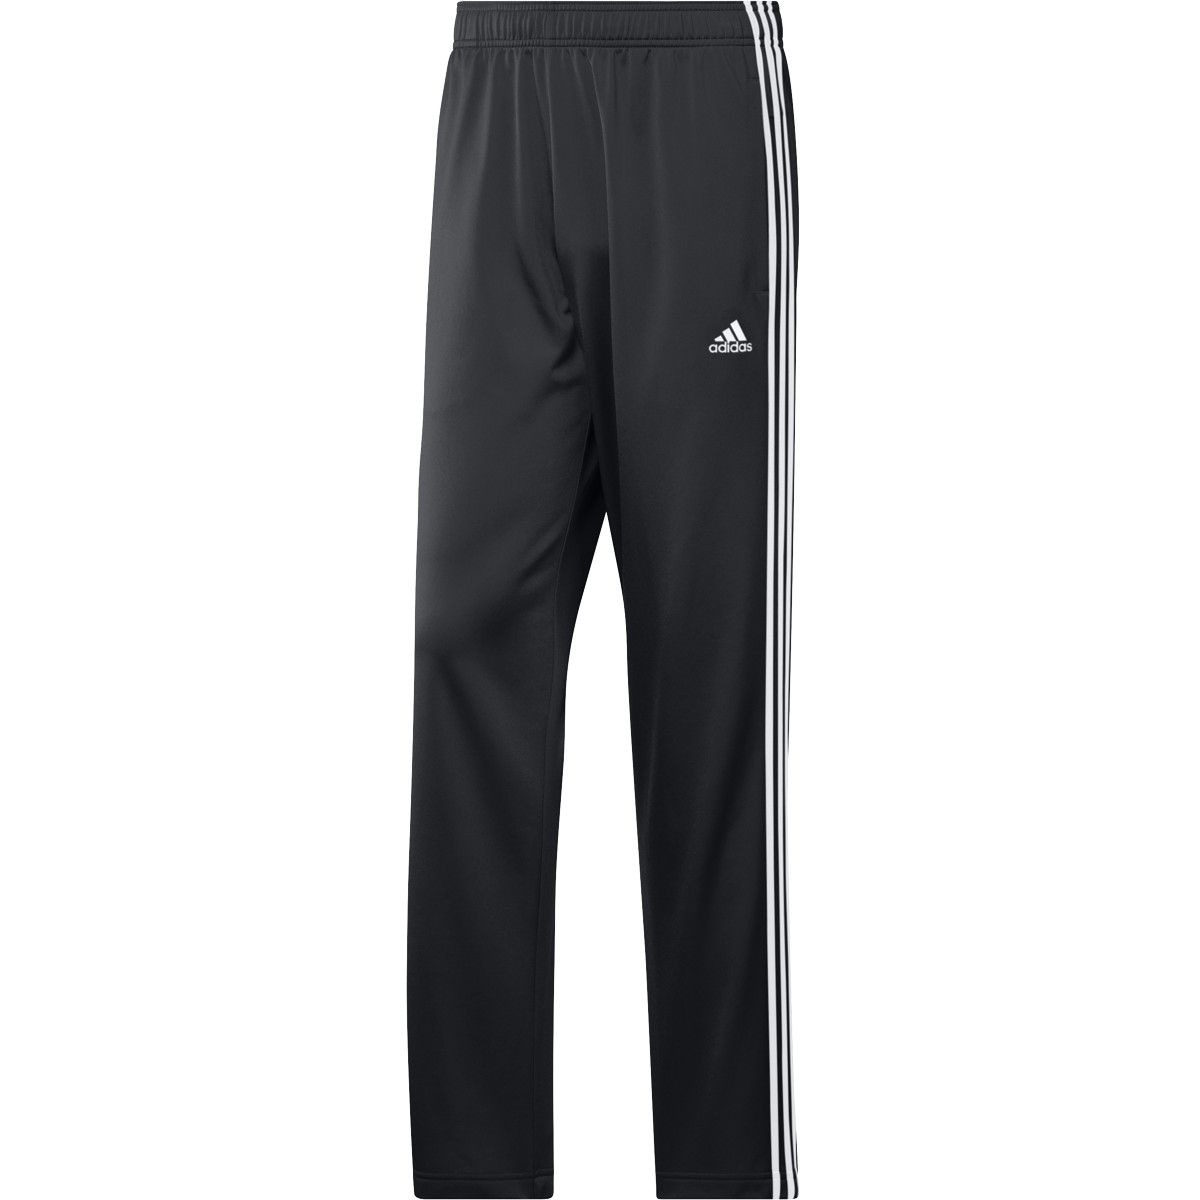 Track Pants & Running Pants | Next Day Delivery Options | Start Fitness